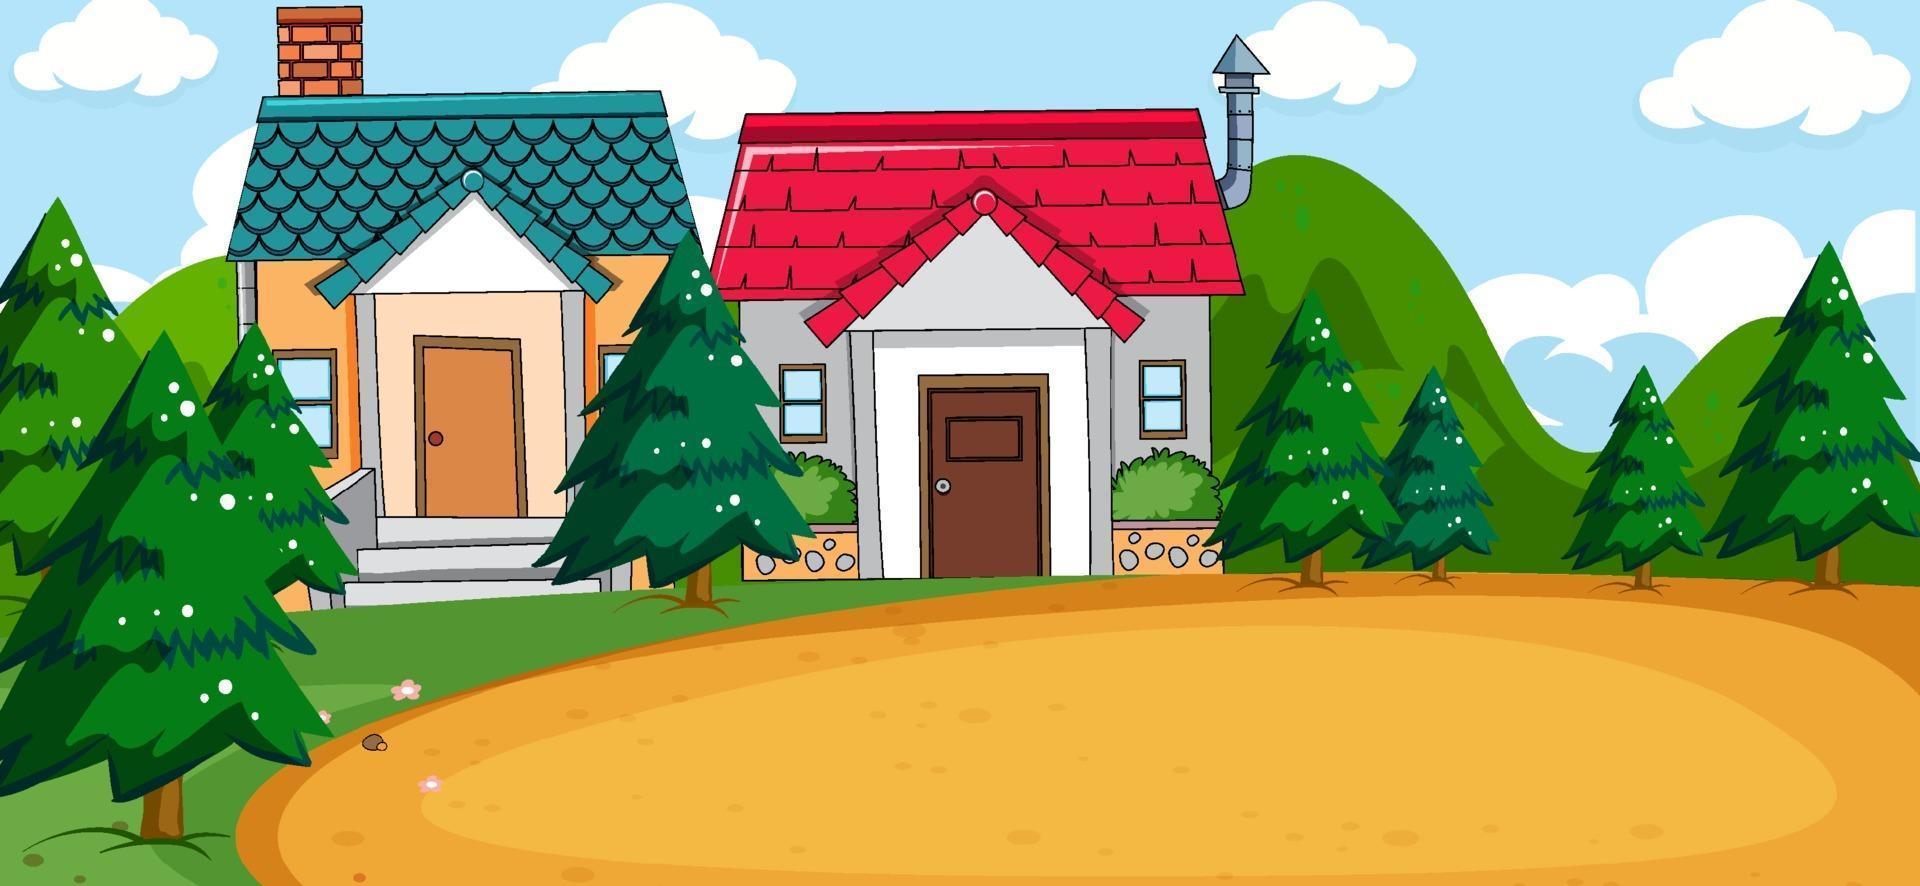 Outdoor scene with two houses and blank playground vector